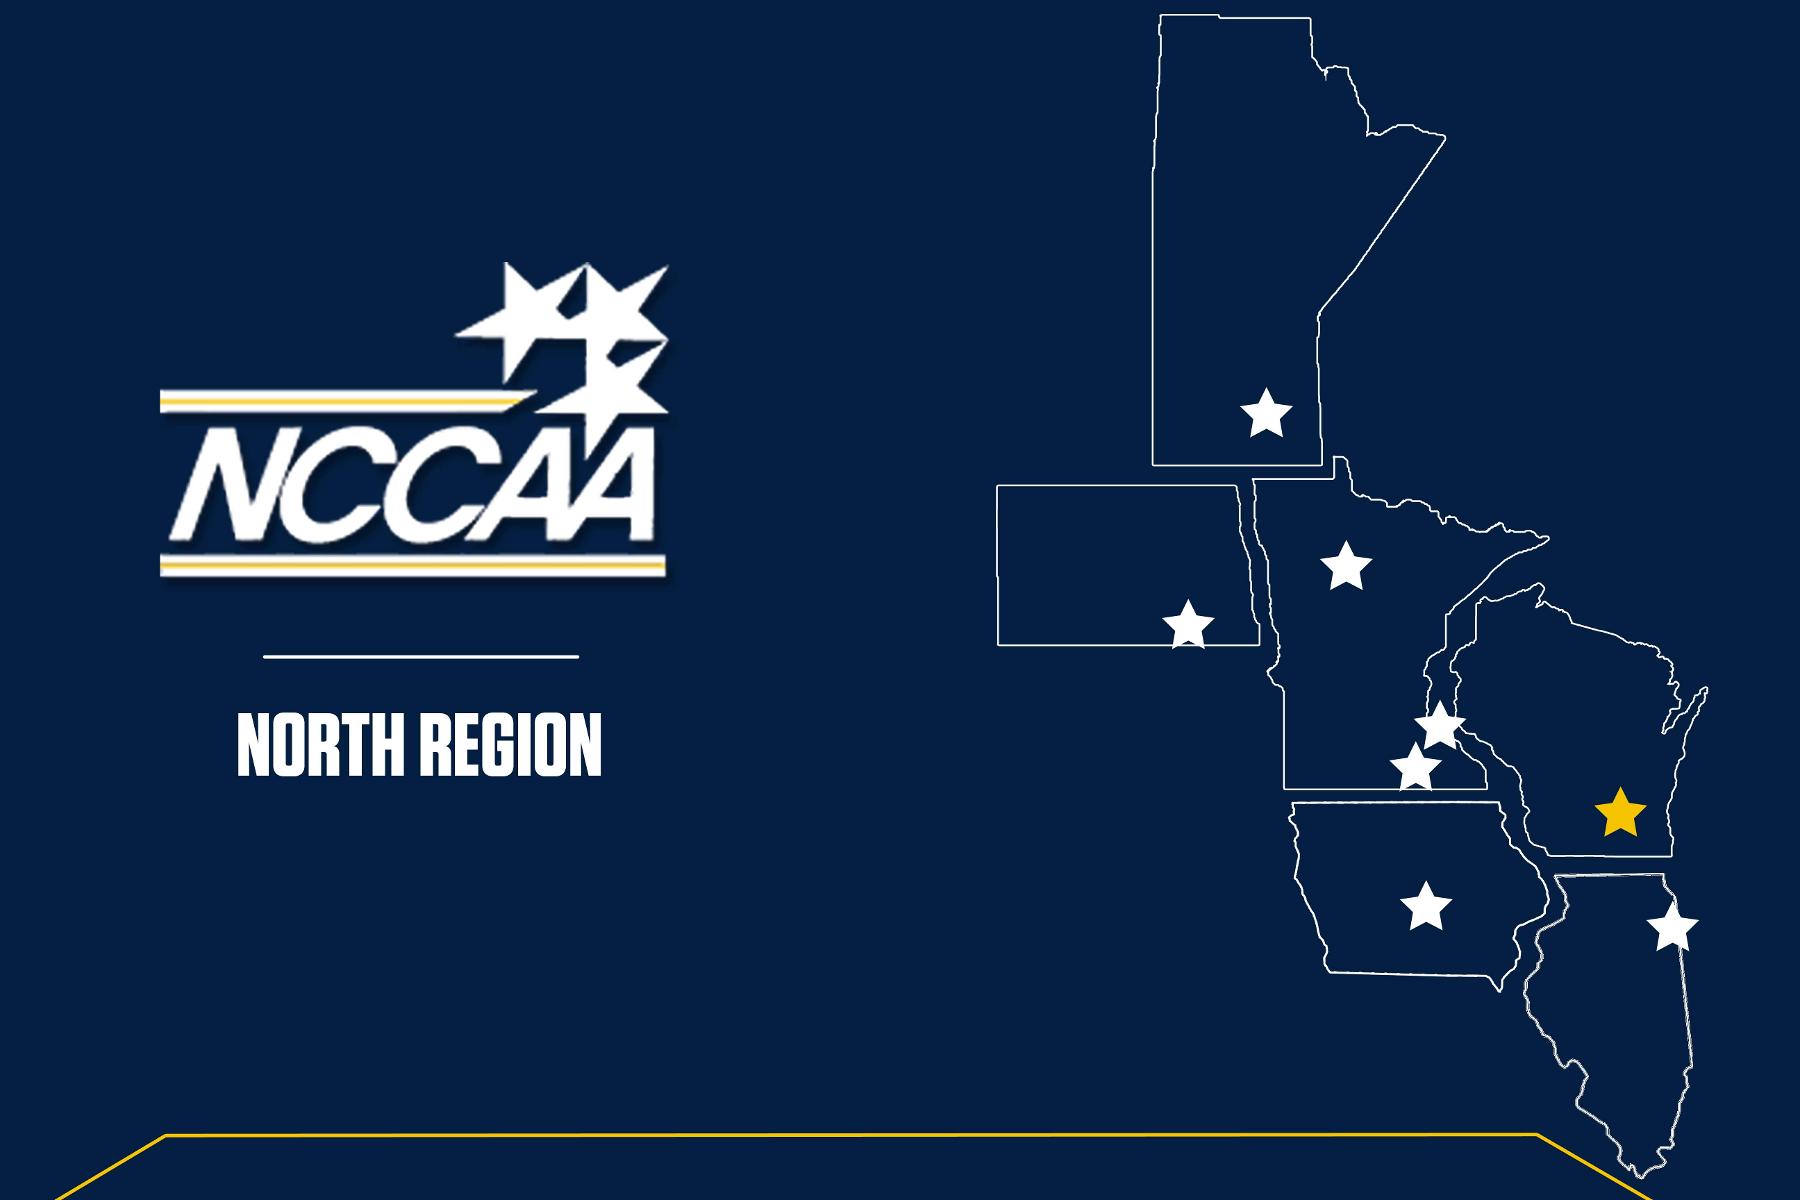 The NCCAA Announces New DII Regional Alignment